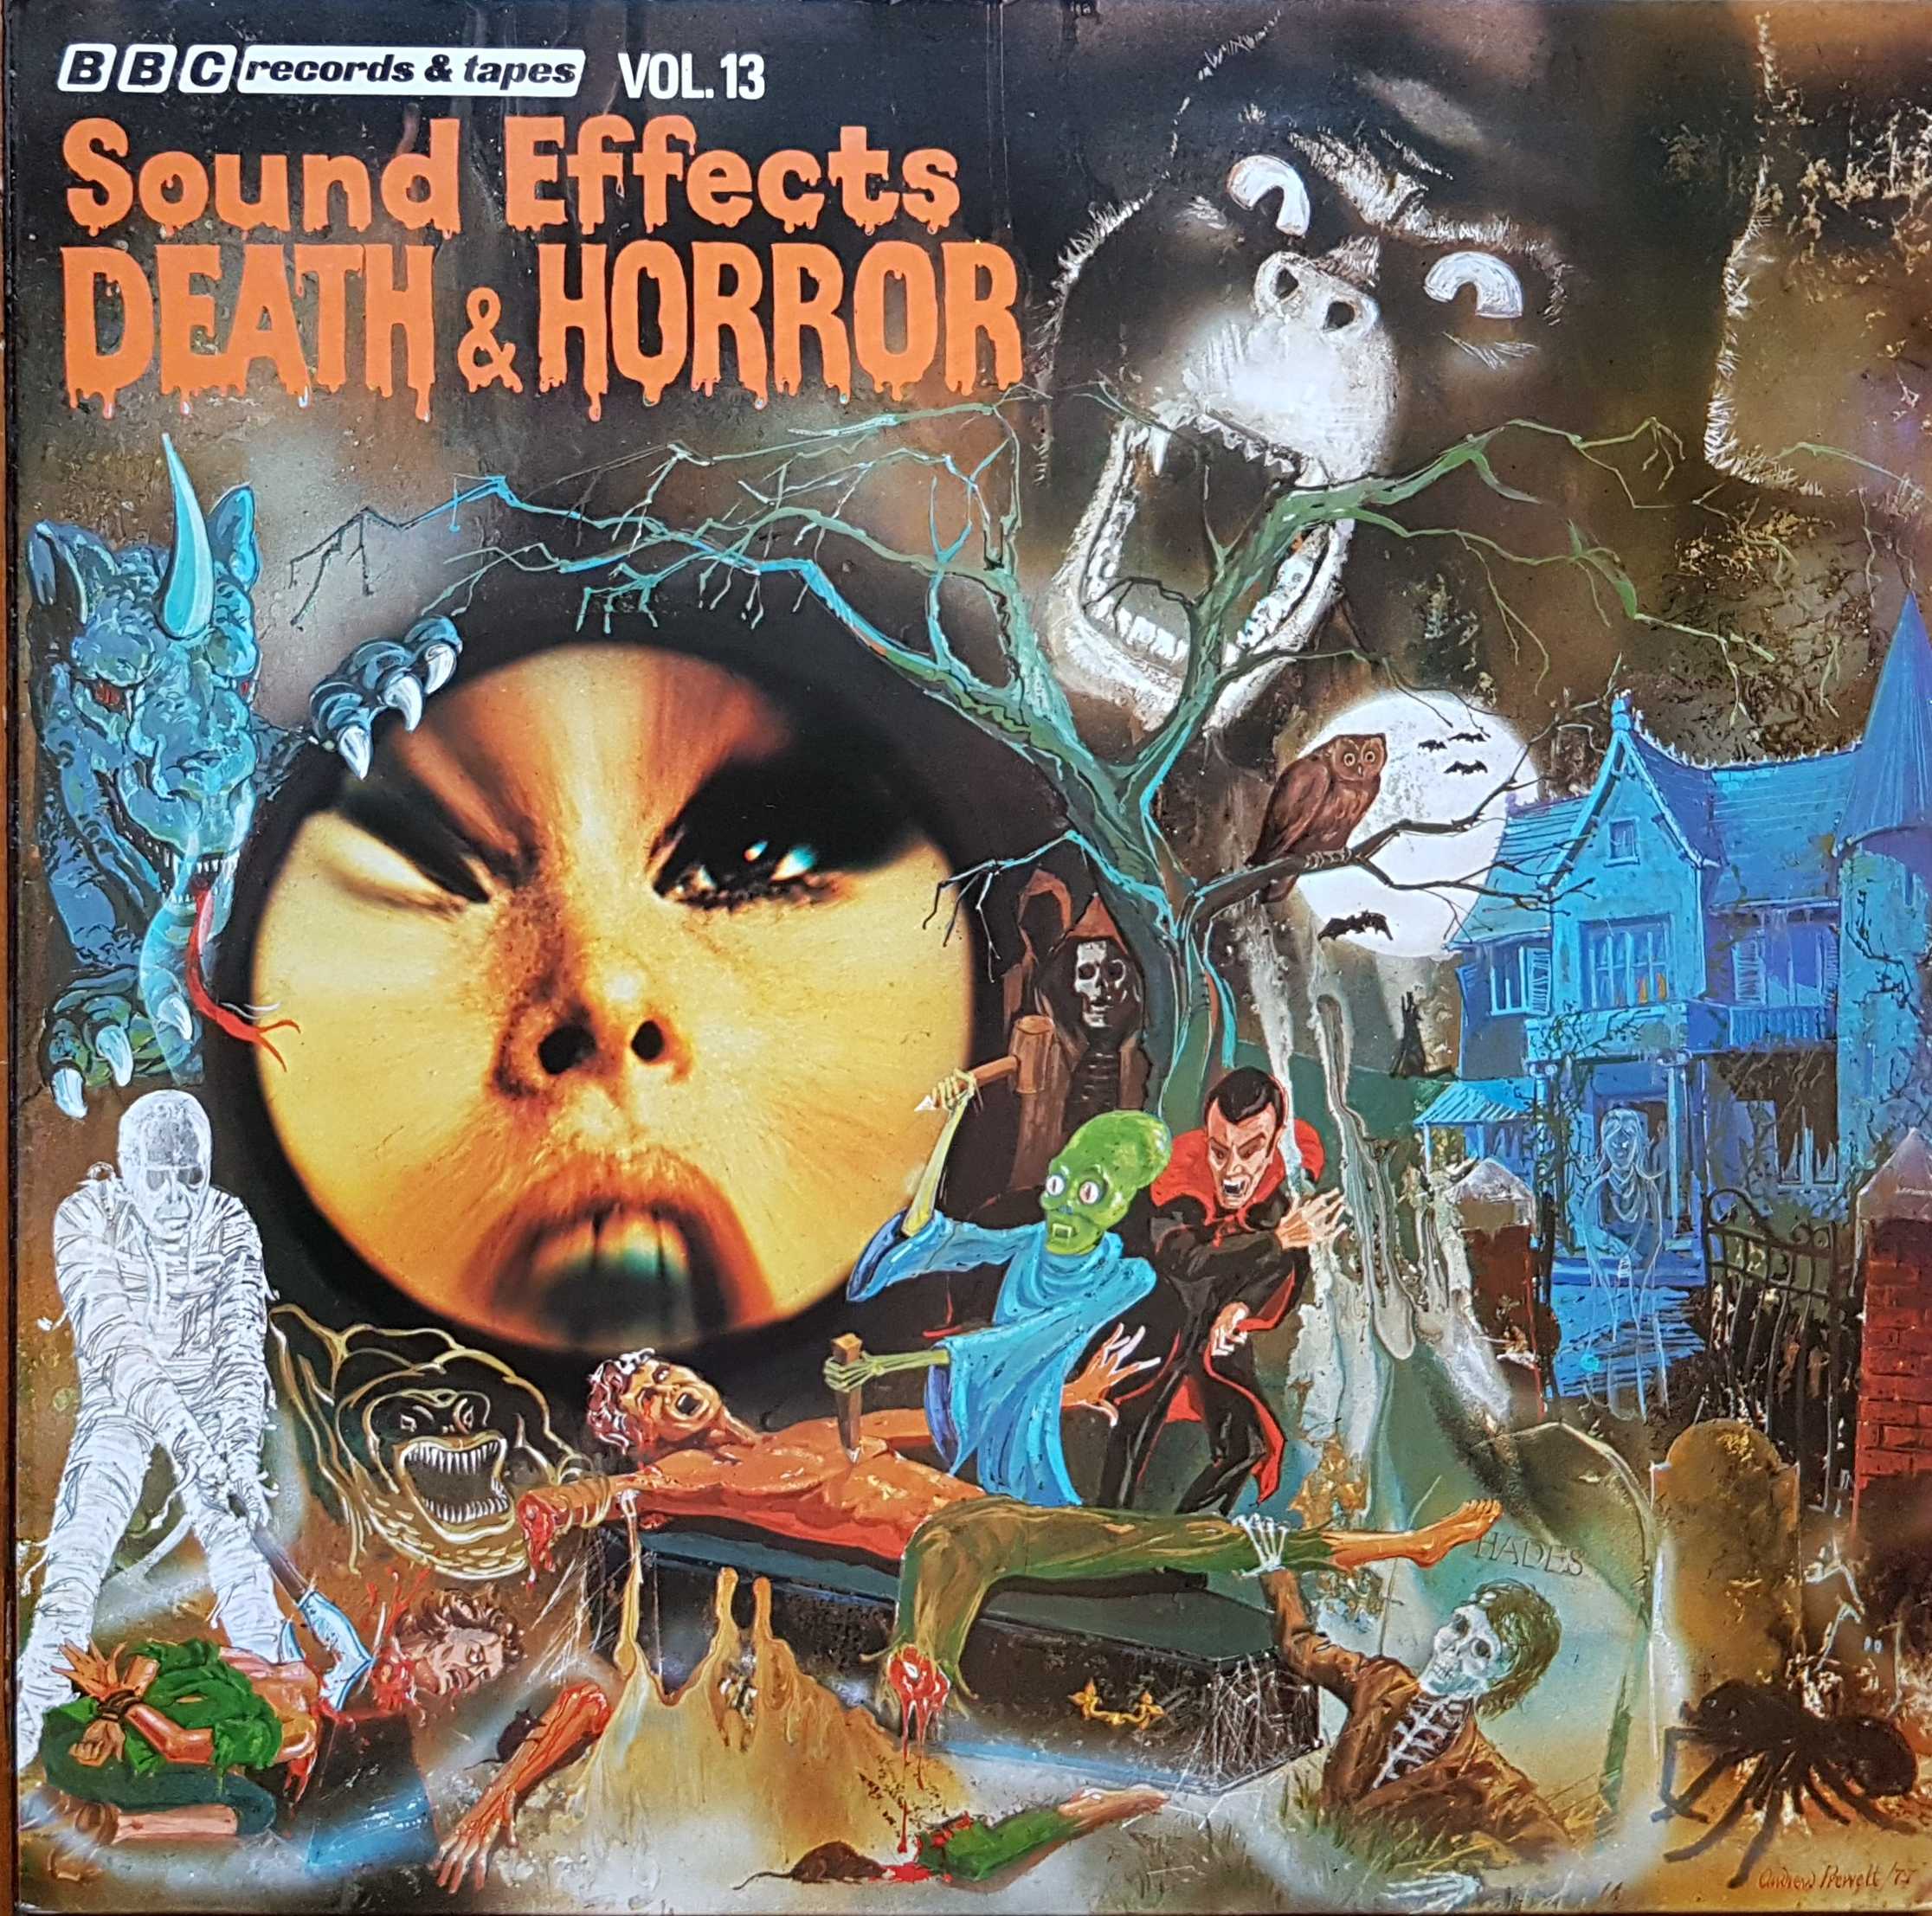 Picture of REC 269 Death and horror (Sound effects no. 13) by artist Mike Harding from the BBC albums - Records and Tapes library